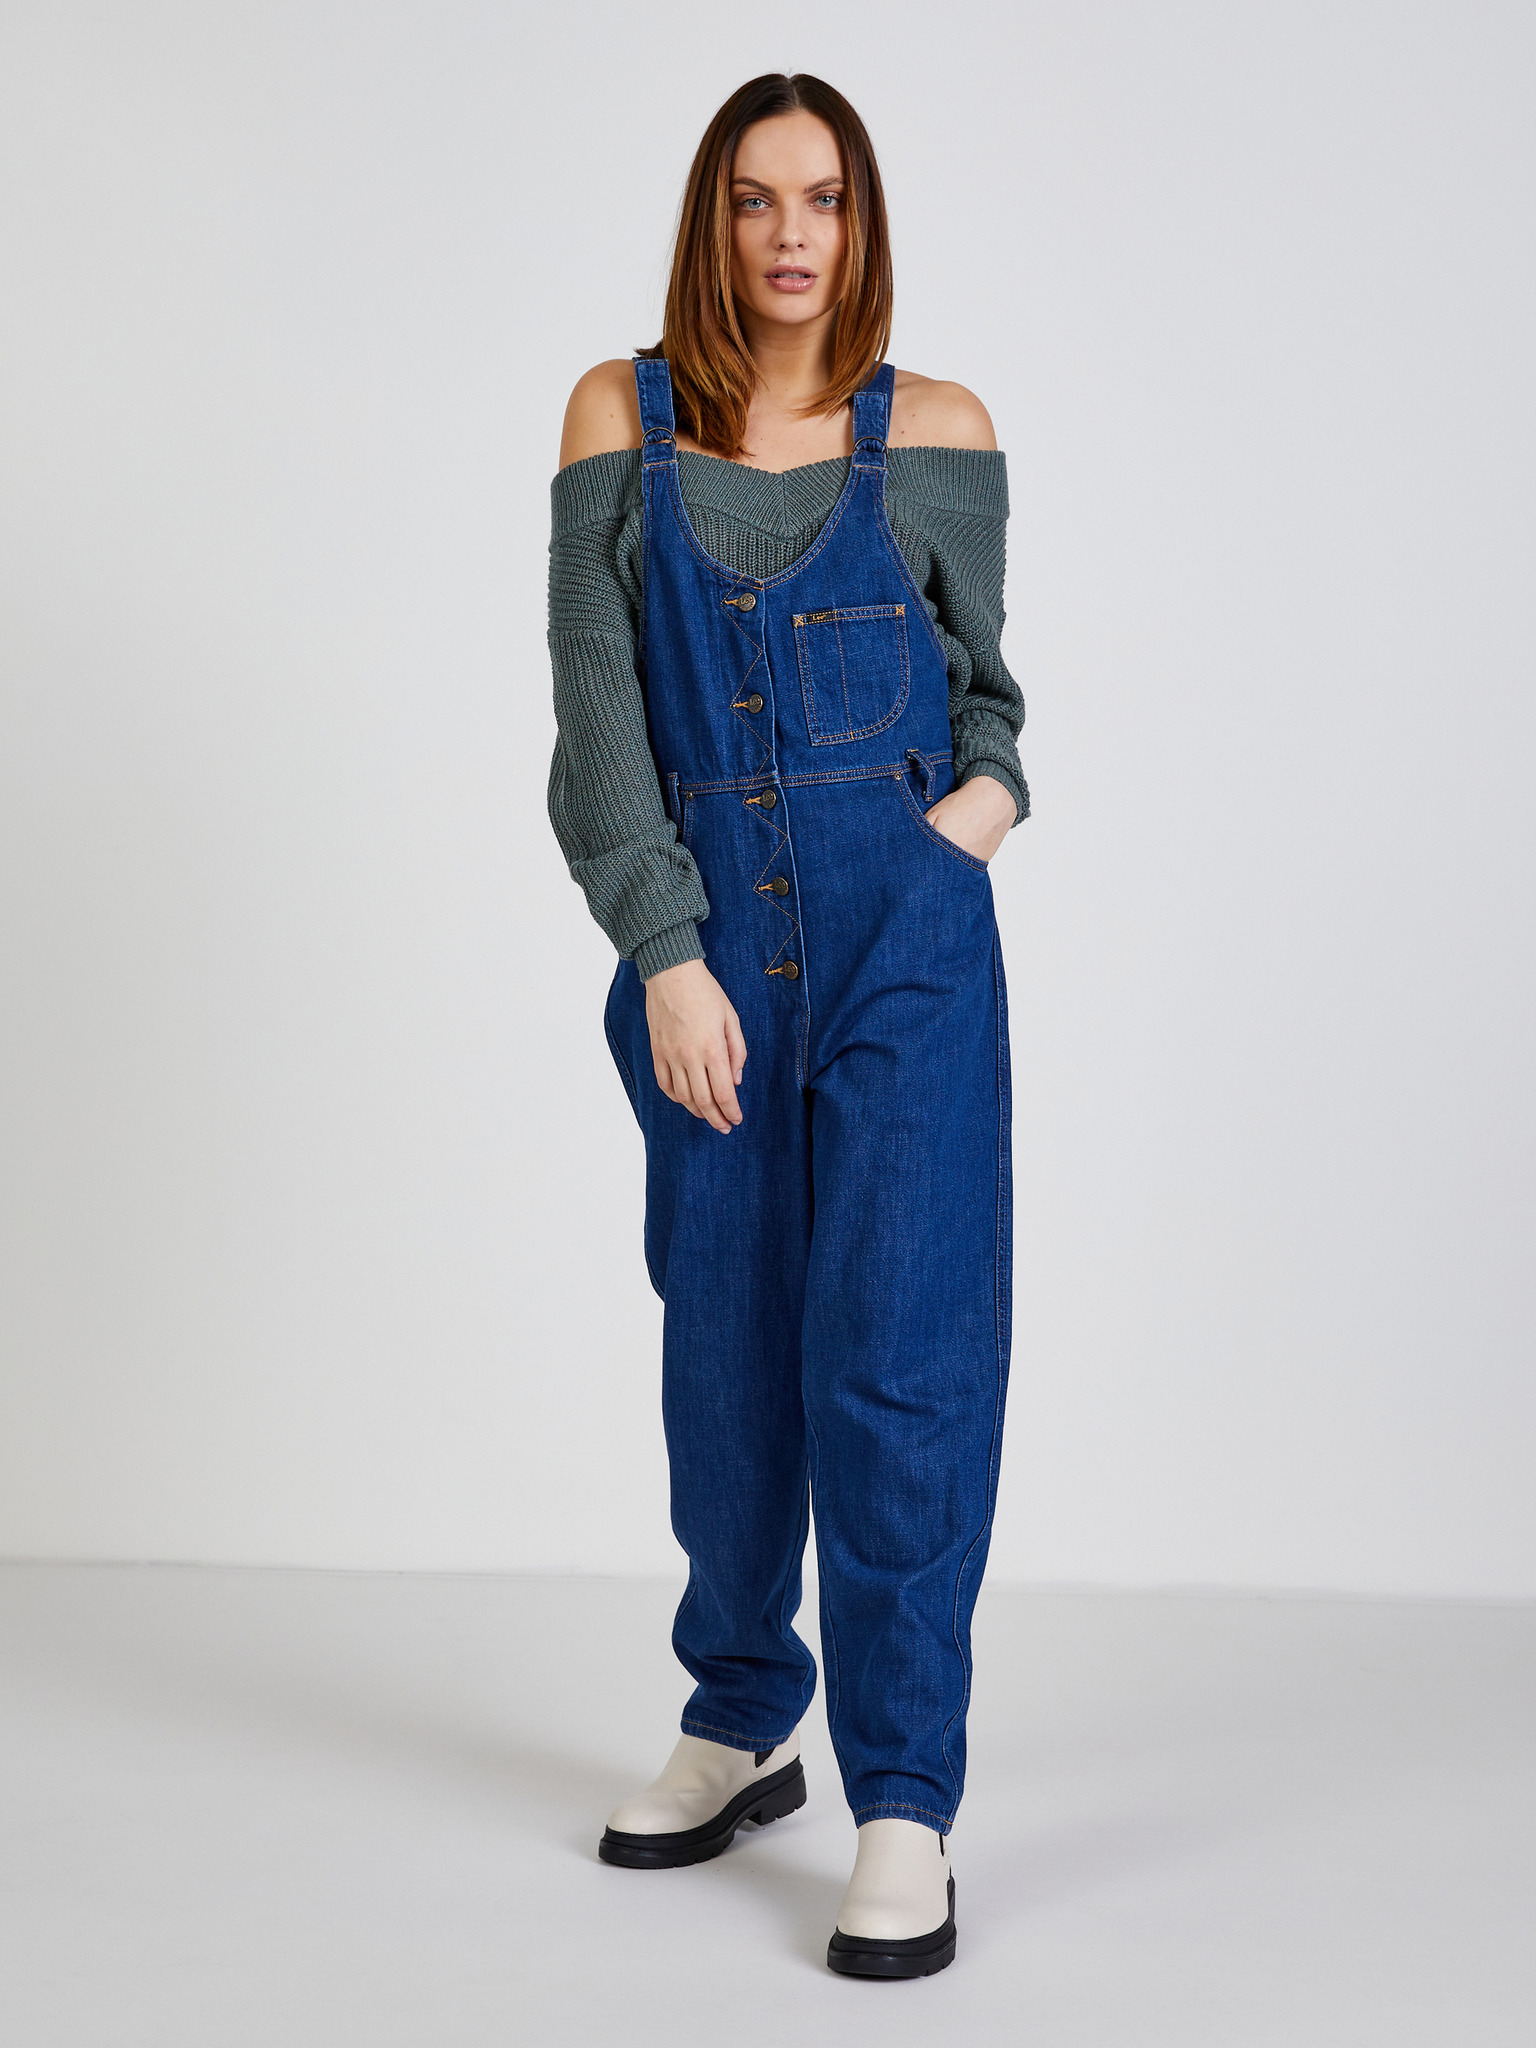 Summer Streetwear Womens High Waist Denim Pepe Jeans Jumpsuit With Zipper,  Slim Fit Braces, And Backless Design From Buoyantrade, $35.48 | DHgate.Com